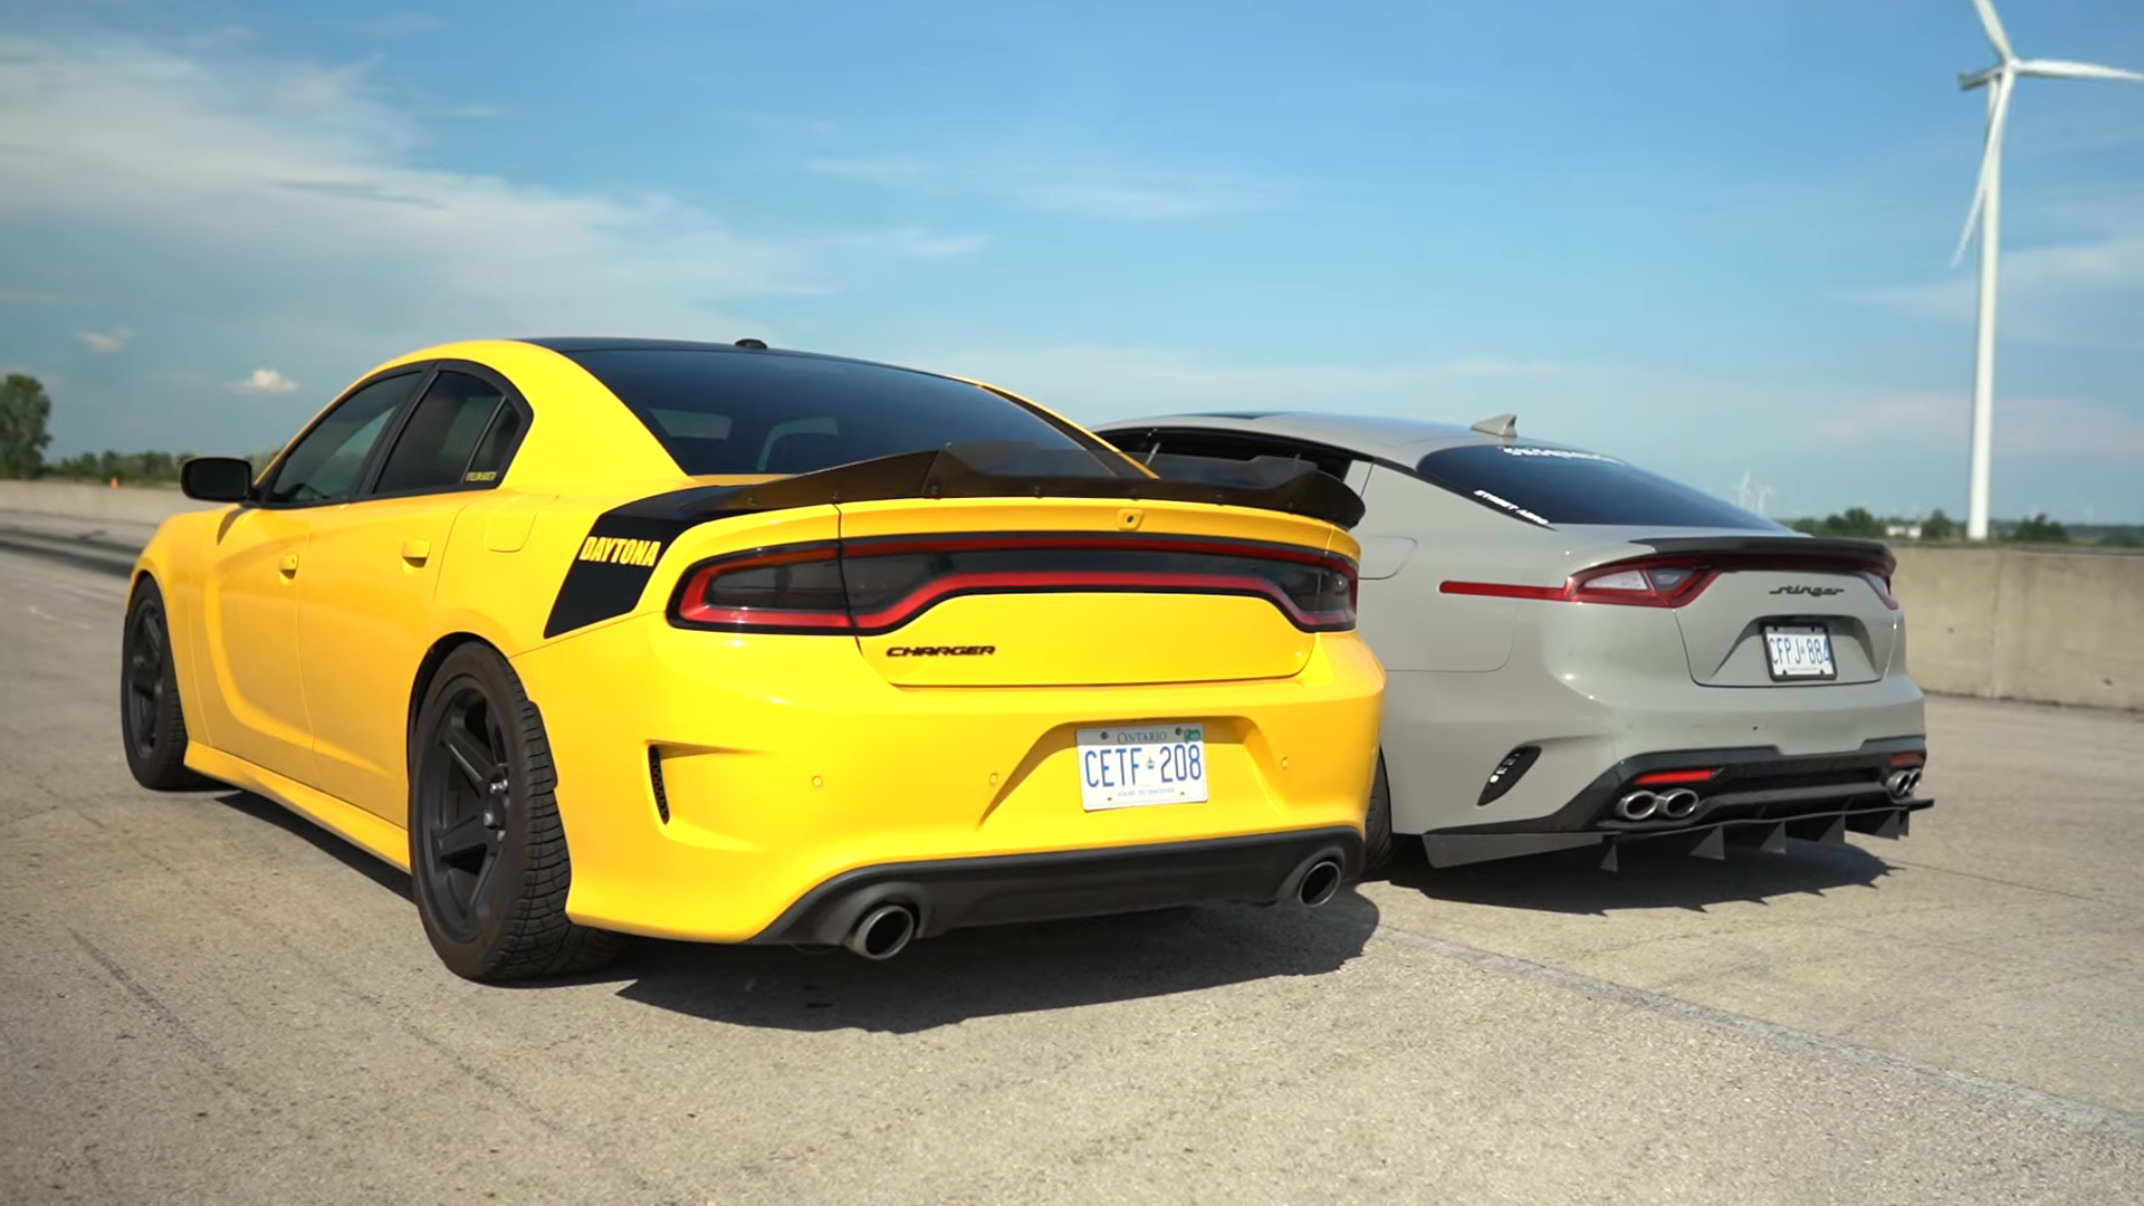 Dodge Charger Draws Inspiration from Kia Stinger, a Welcome Development